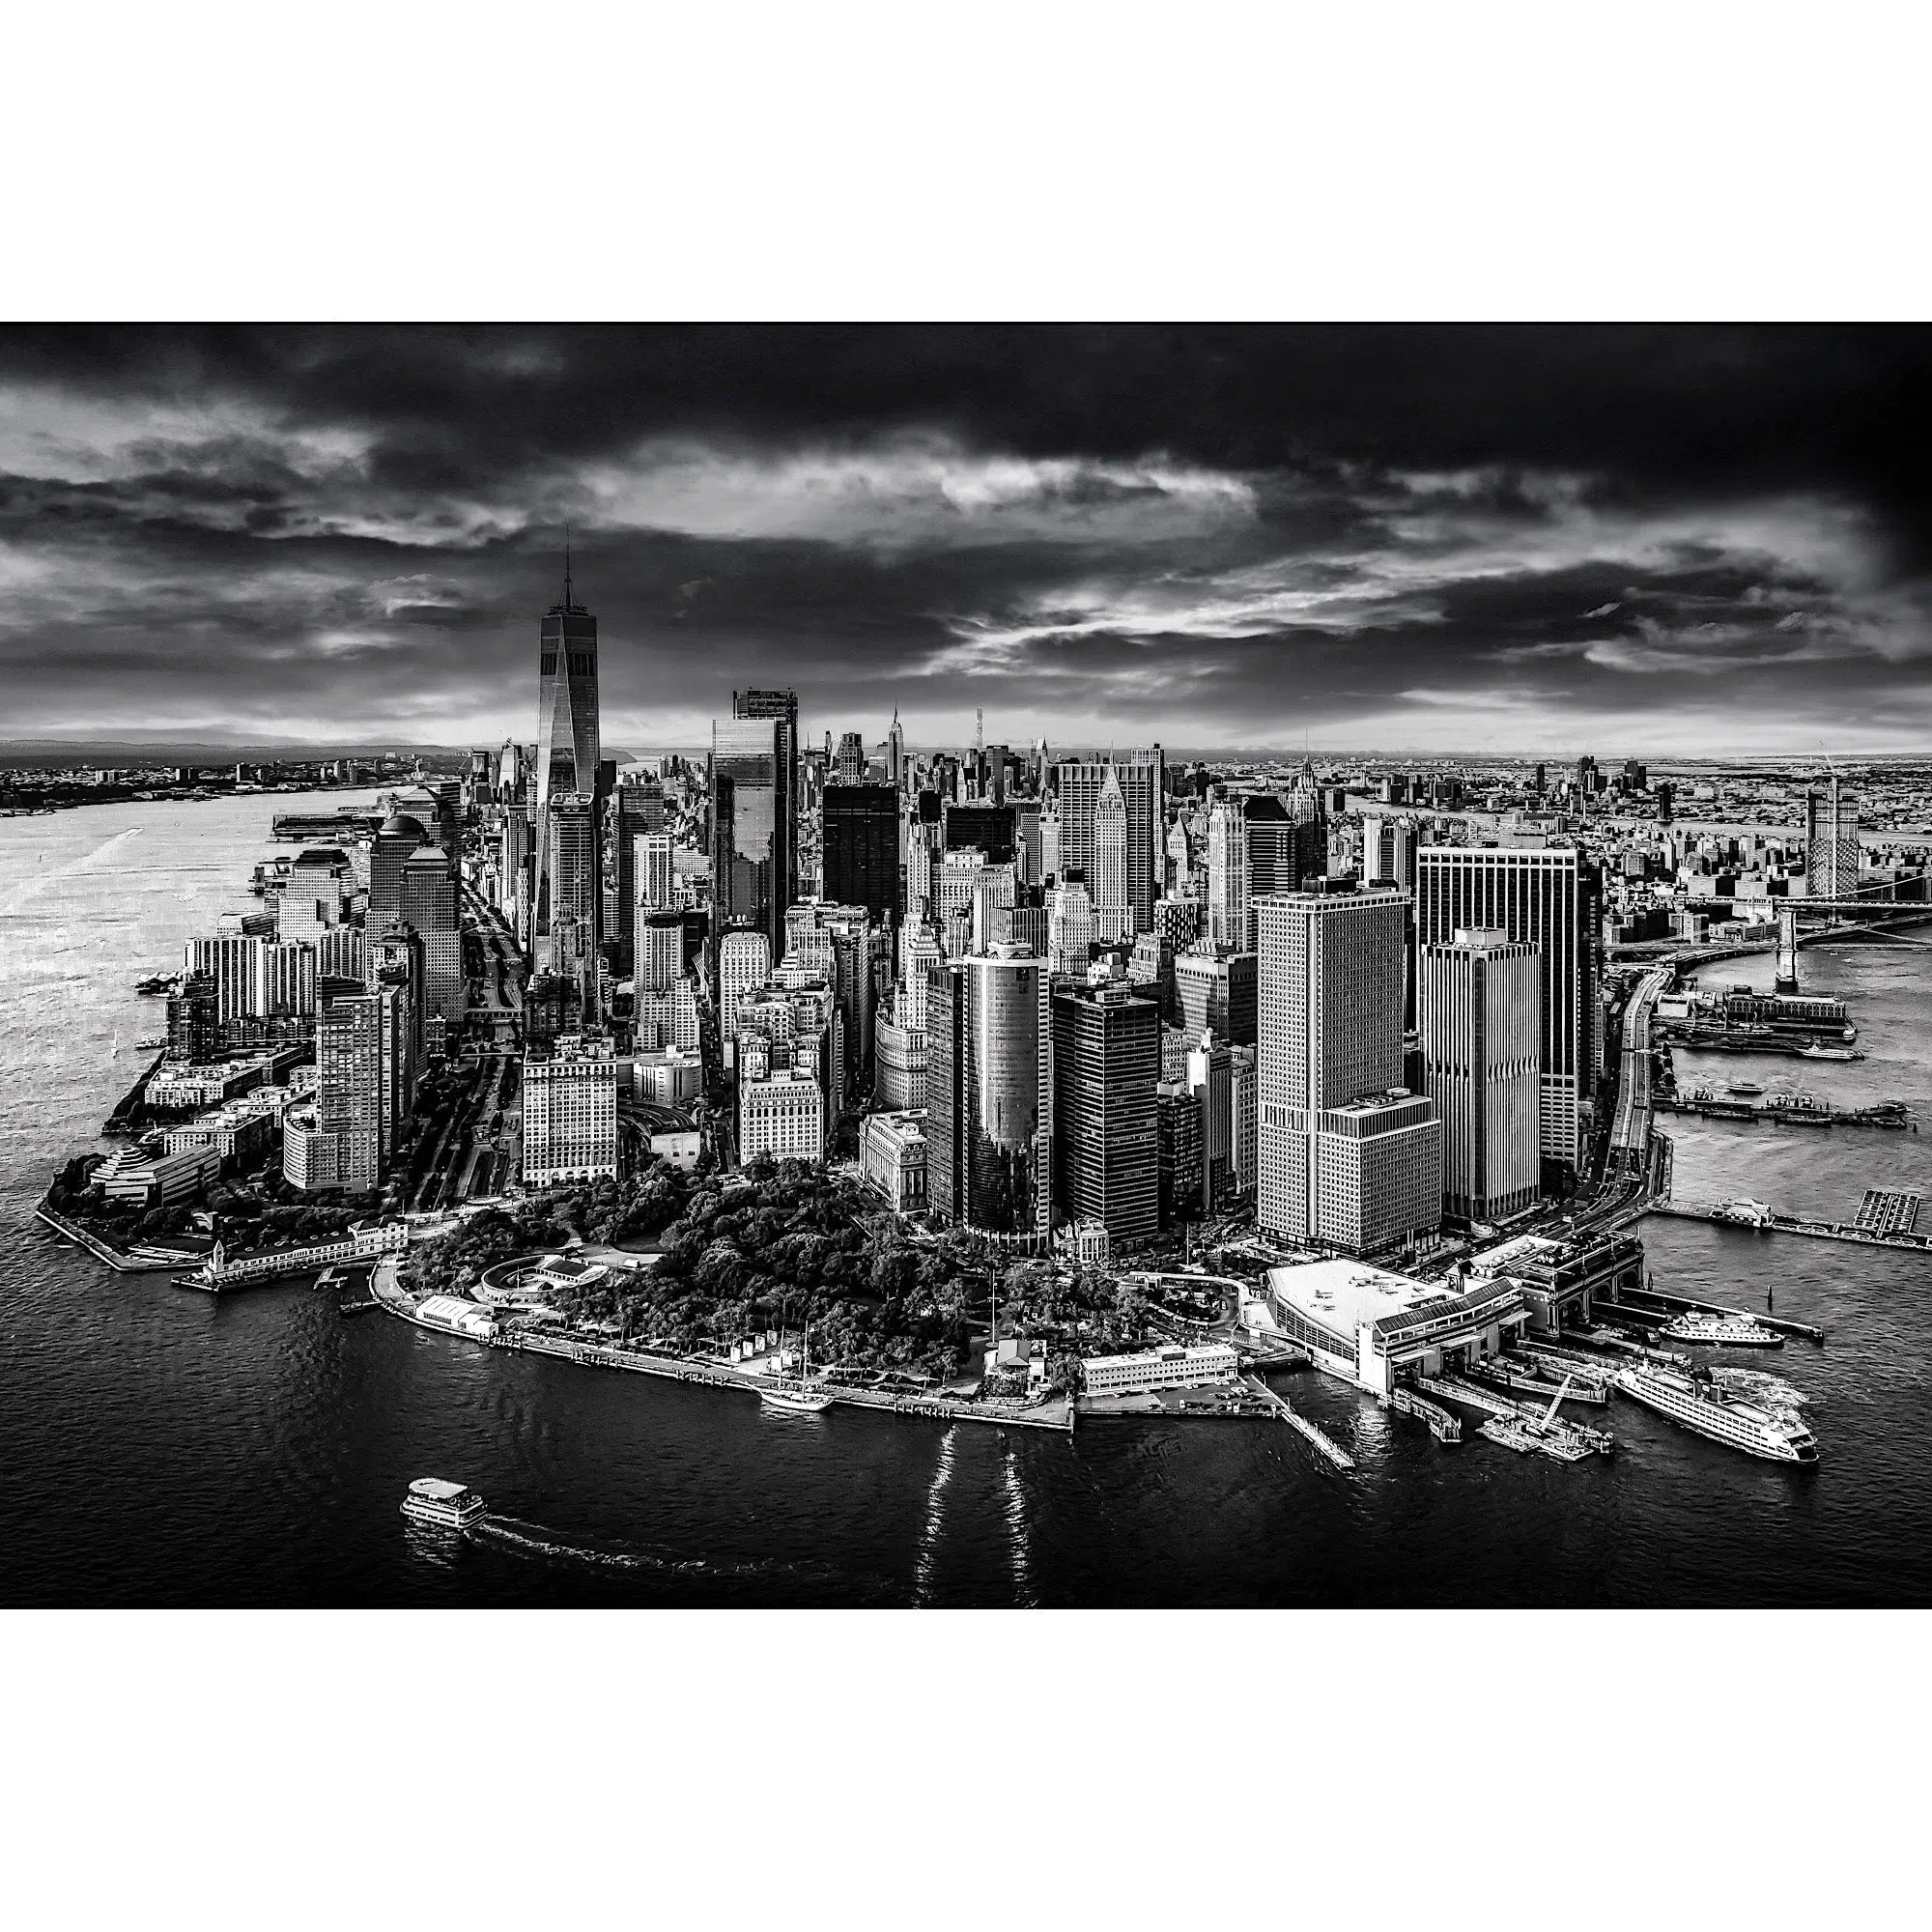 Manhattan, from the top-Imagesdartistes